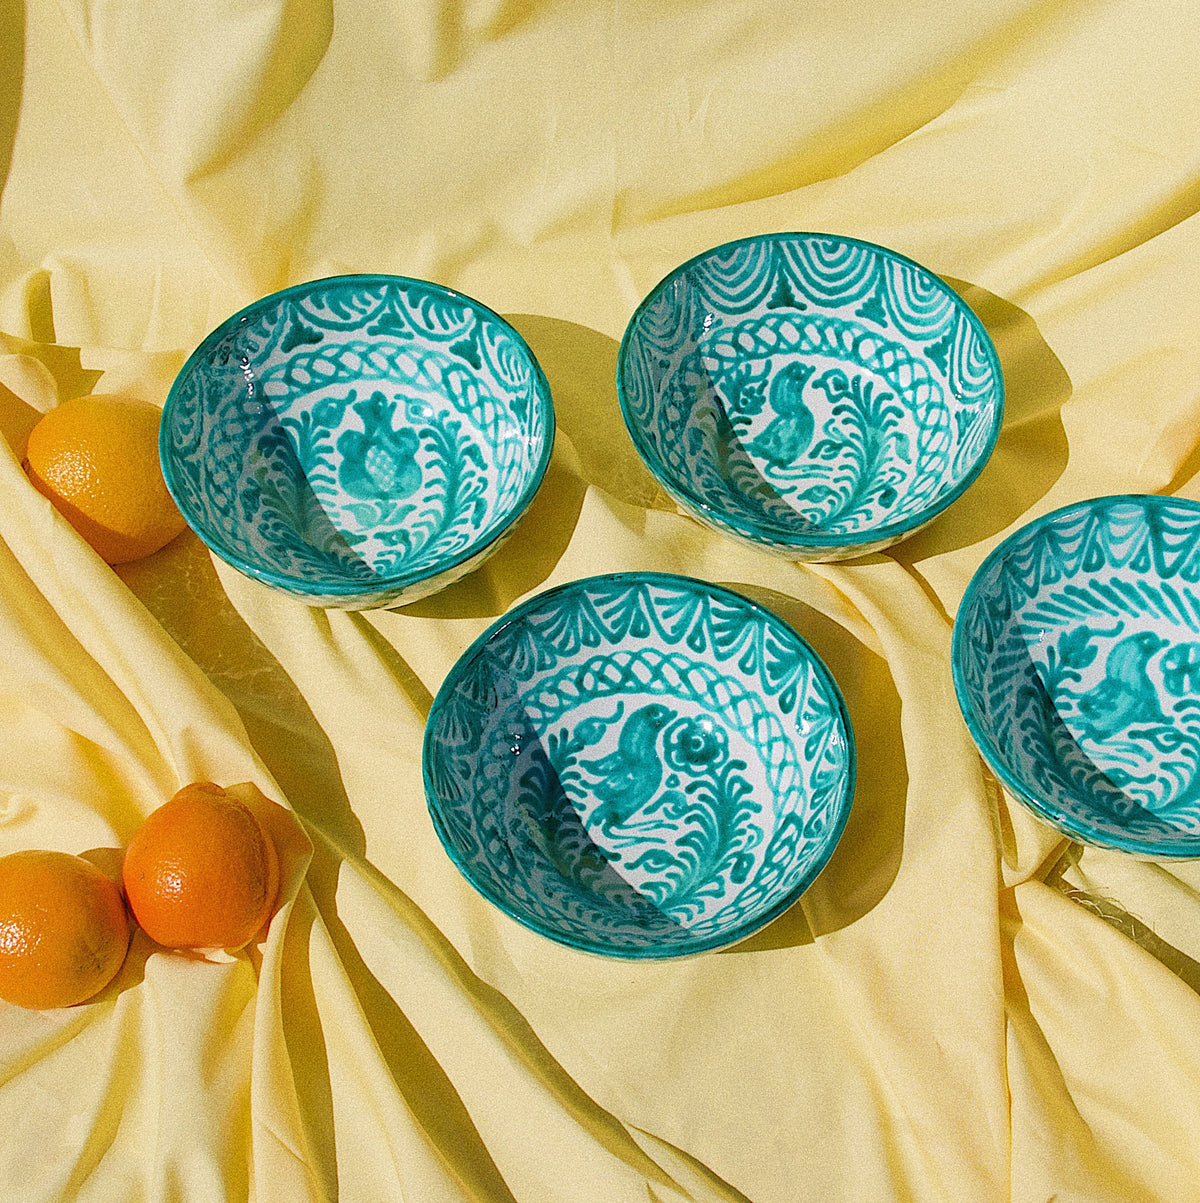 MEDIUM bowl with hand painted designs - Pomelo casa